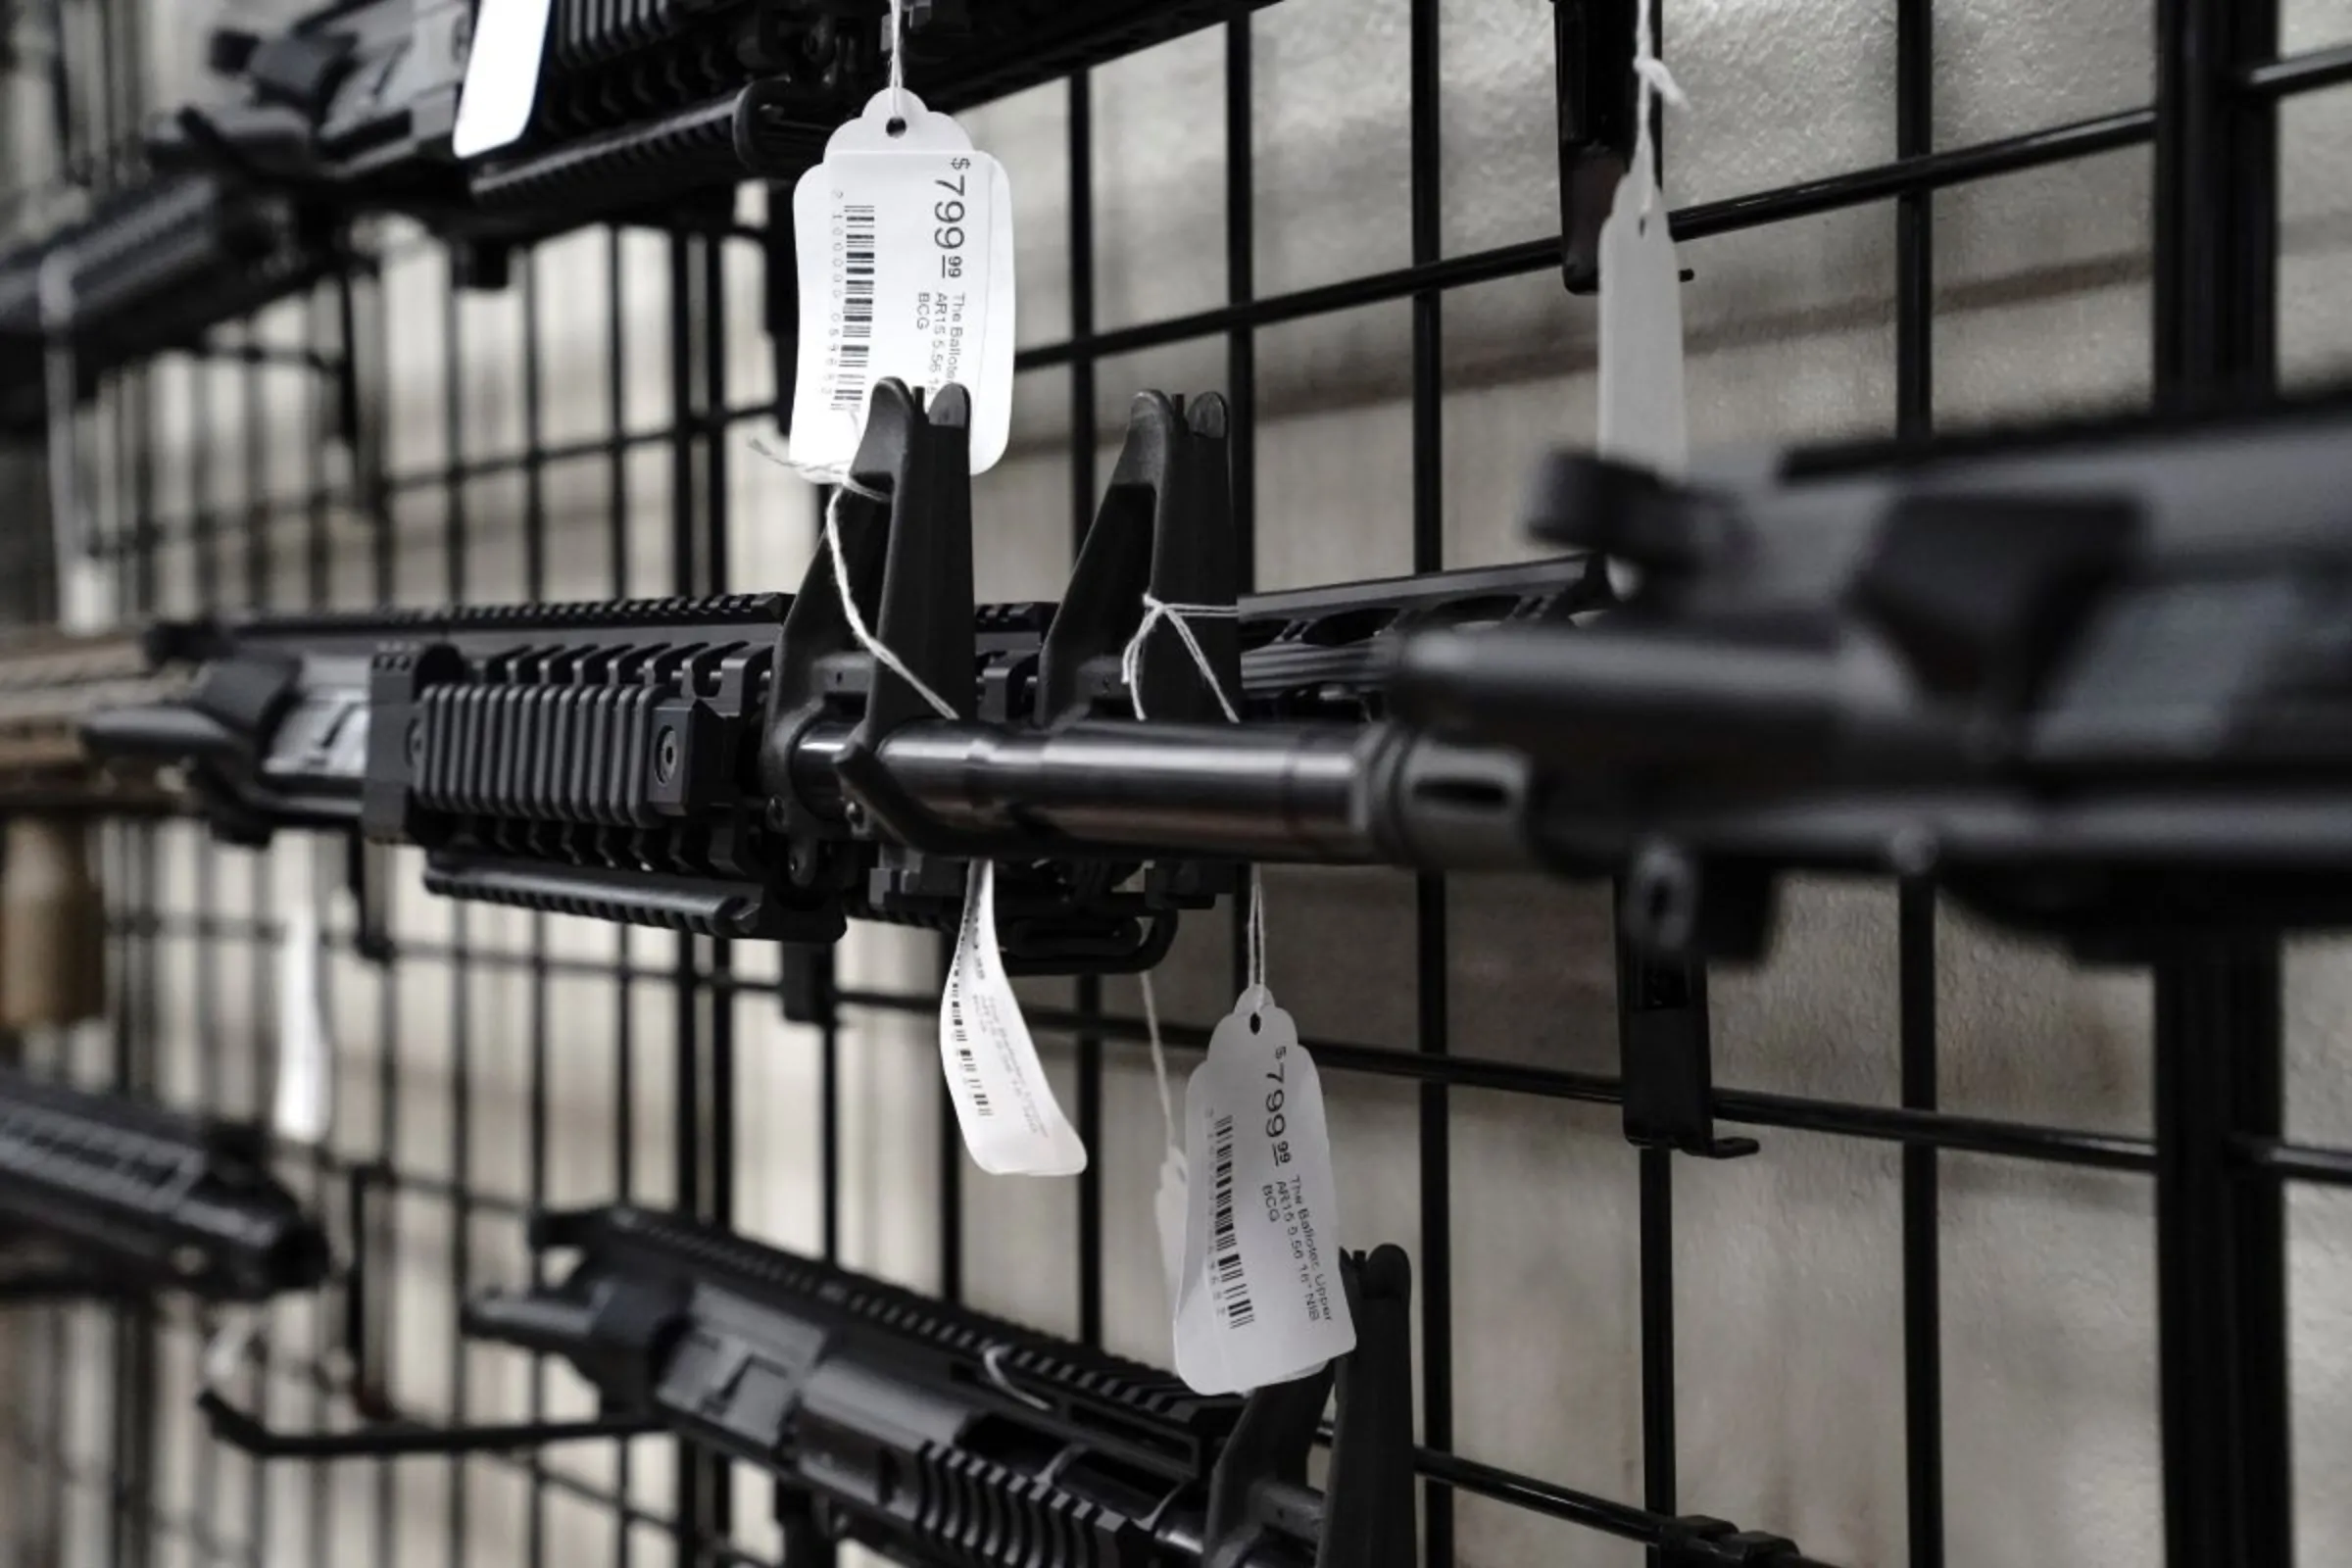 An AR-15 upper receiver nicknamed 'The Balloter' is seen for sale at Firearms Unknown, a gun store in Oceanside, California, U.S., April 12, 2021. REUTERS/Bing Guan